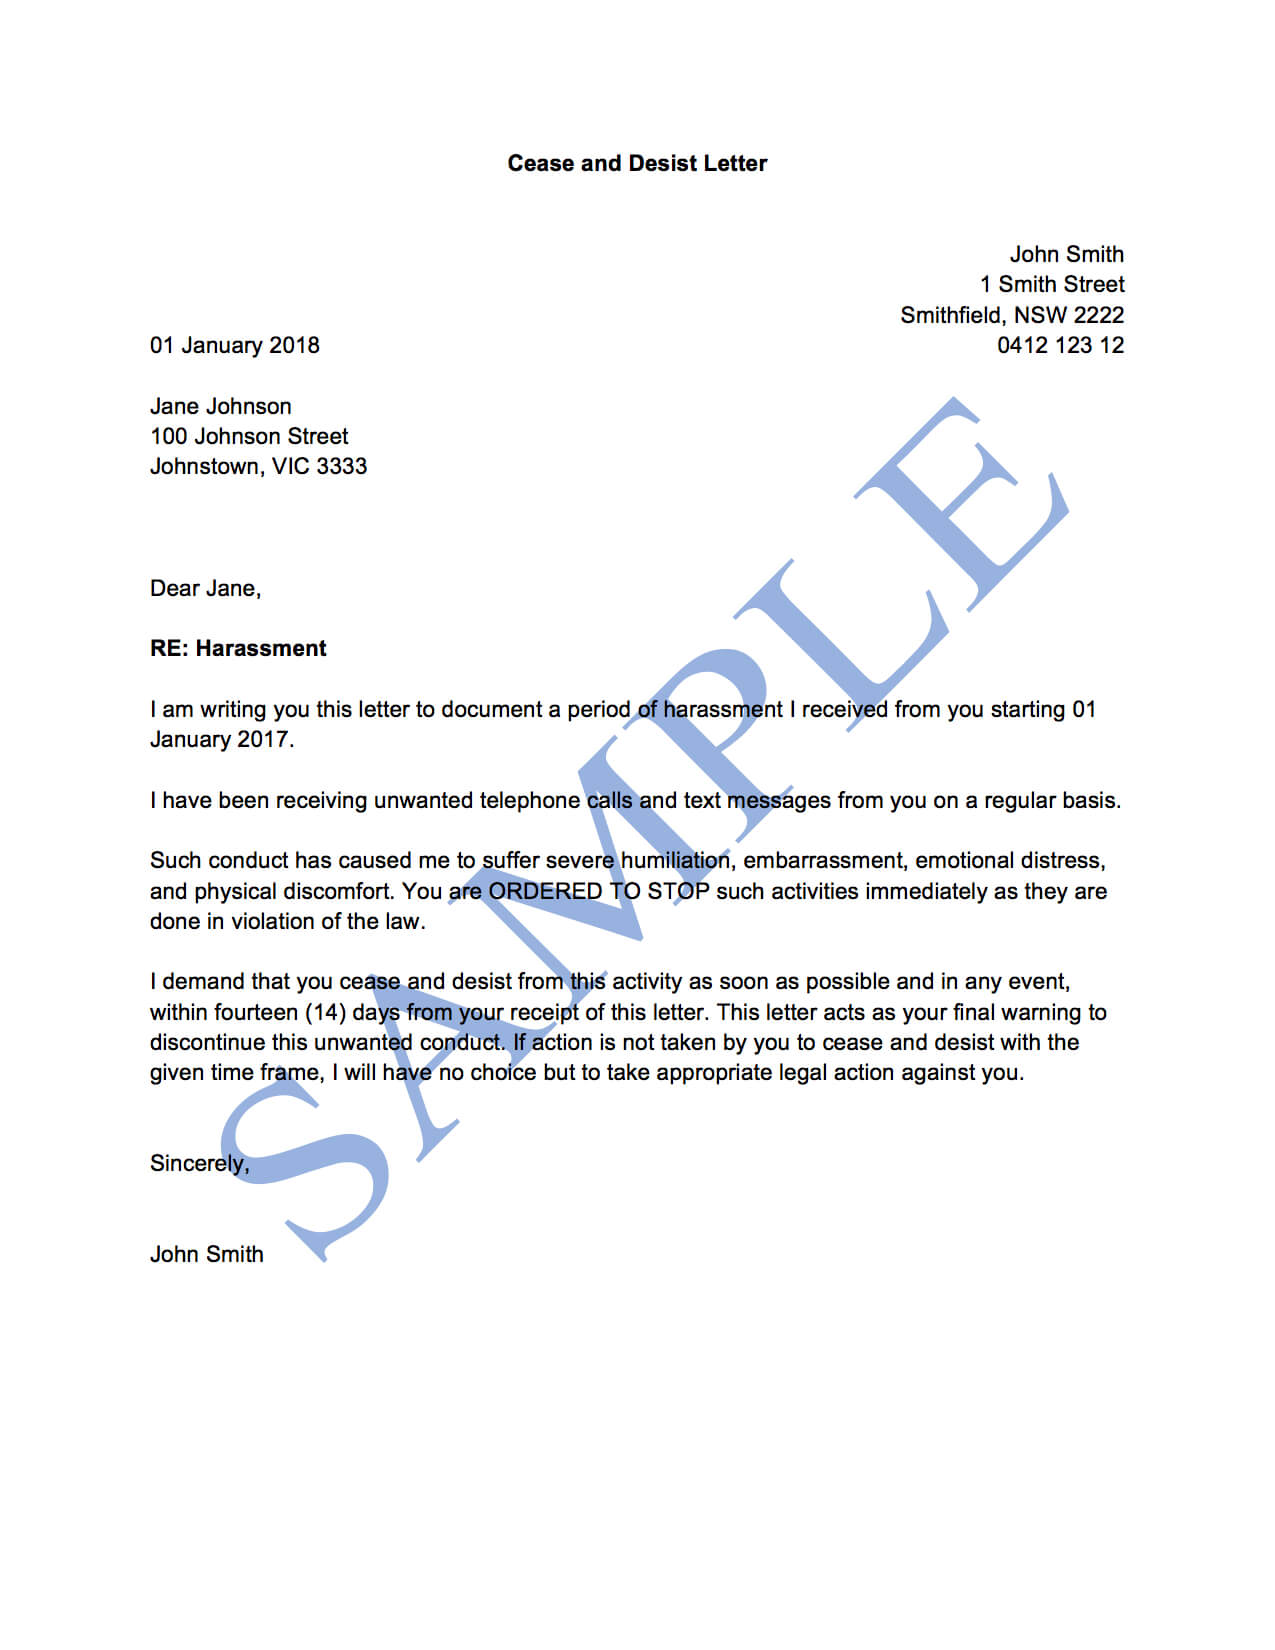 Cease And Desist (Harassment) – Free Template | Sample – Lawpath Inside Cease And Desist Letter Template Australia